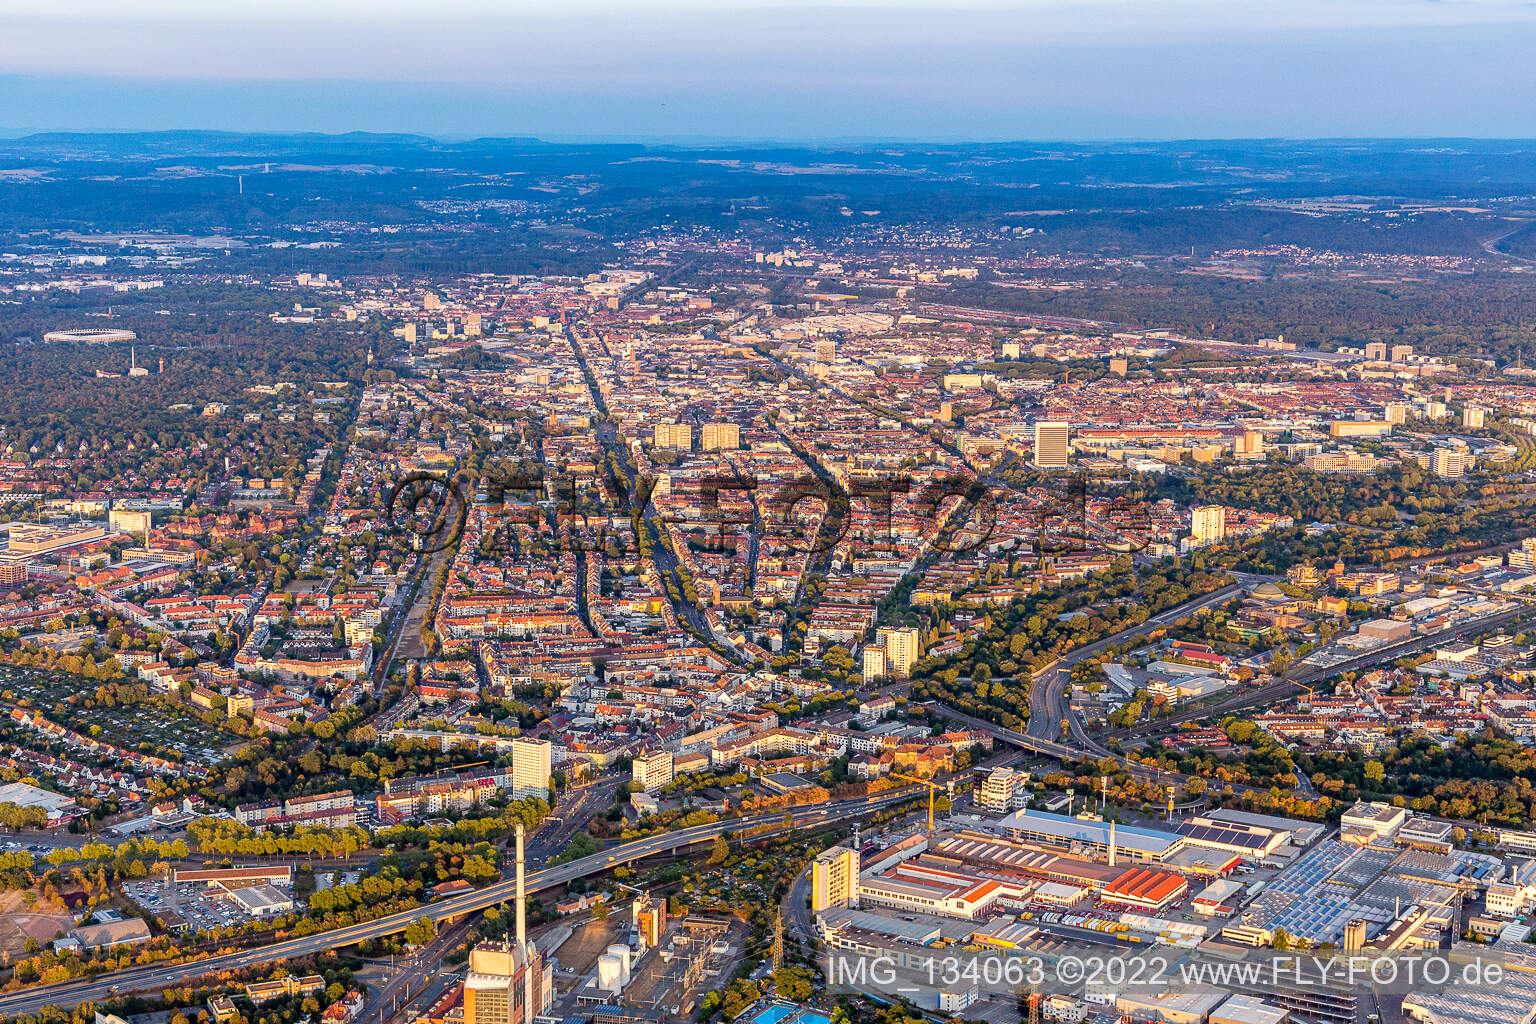 District Mühlburg in Karlsruhe in the state Baden-Wuerttemberg, Germany seen from above